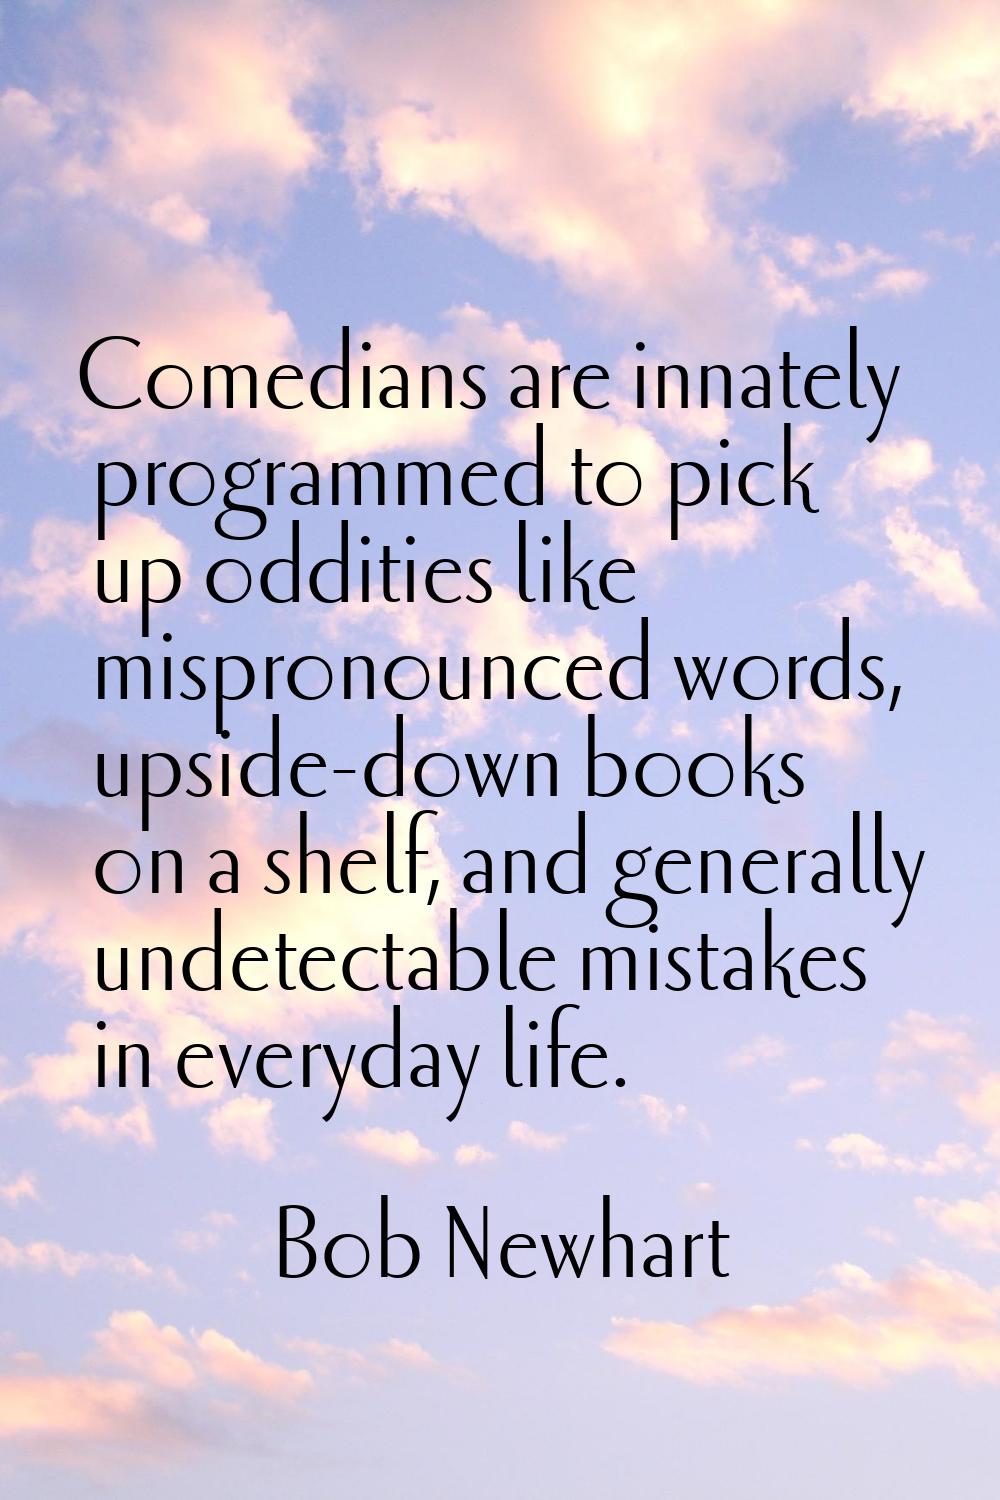 Comedians are innately programmed to pick up oddities like mispronounced words, upside-down books o